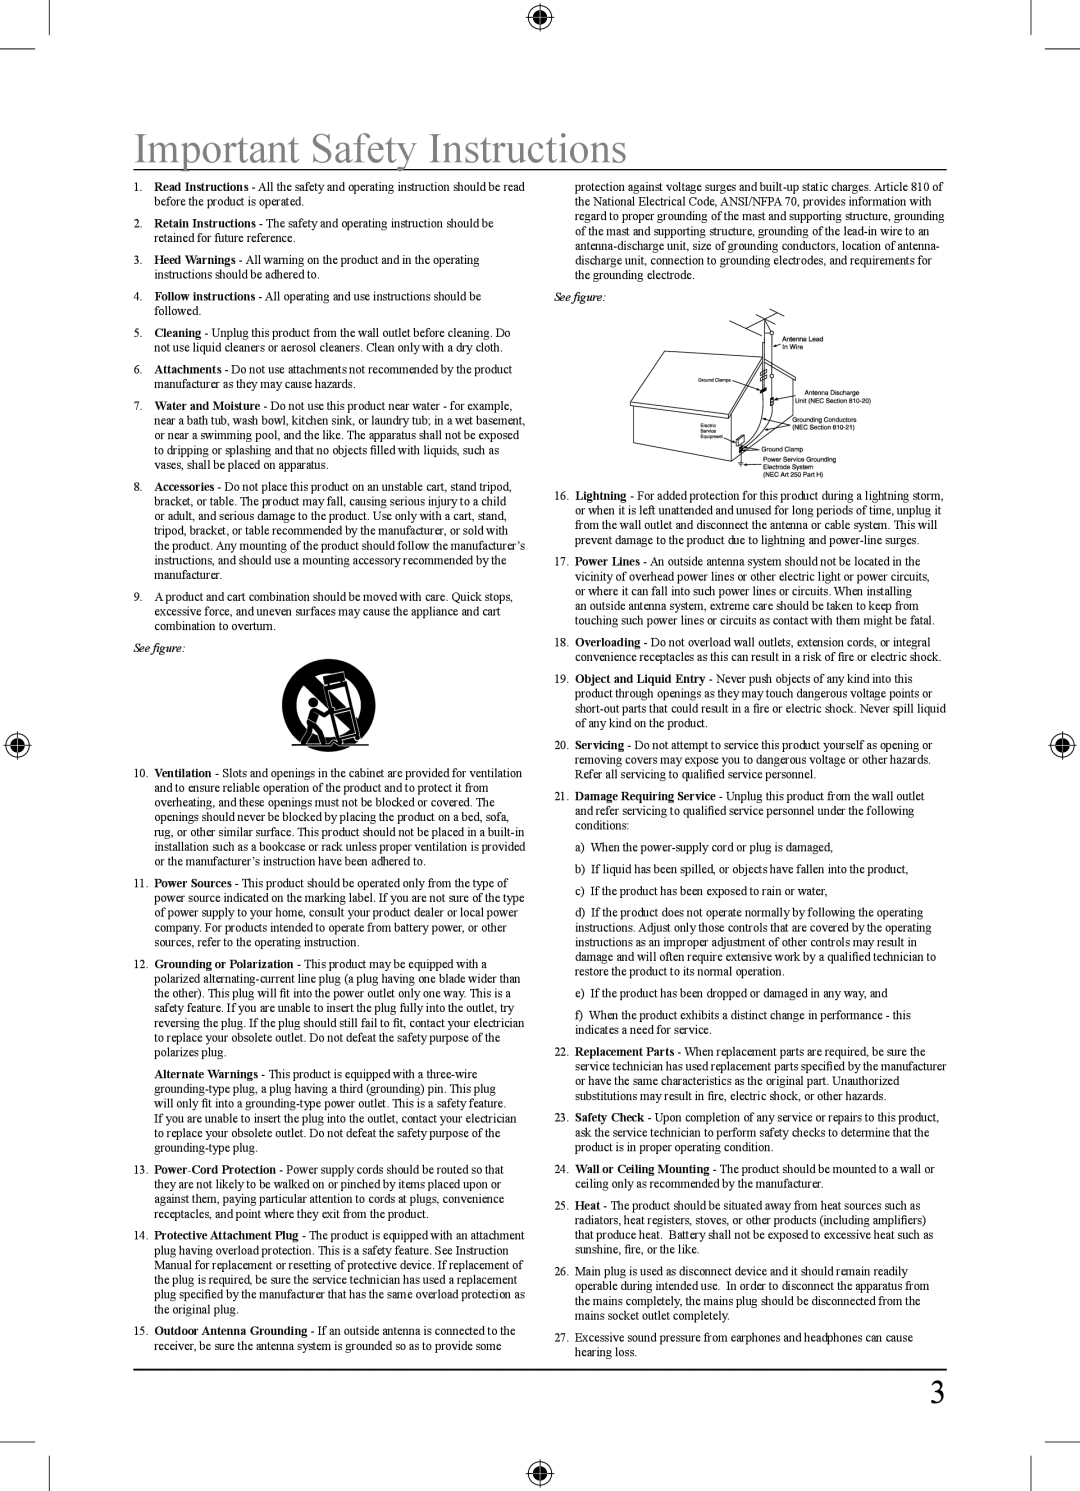 iLive NS108B important safety instructions Important Safety Instructions, See figure 